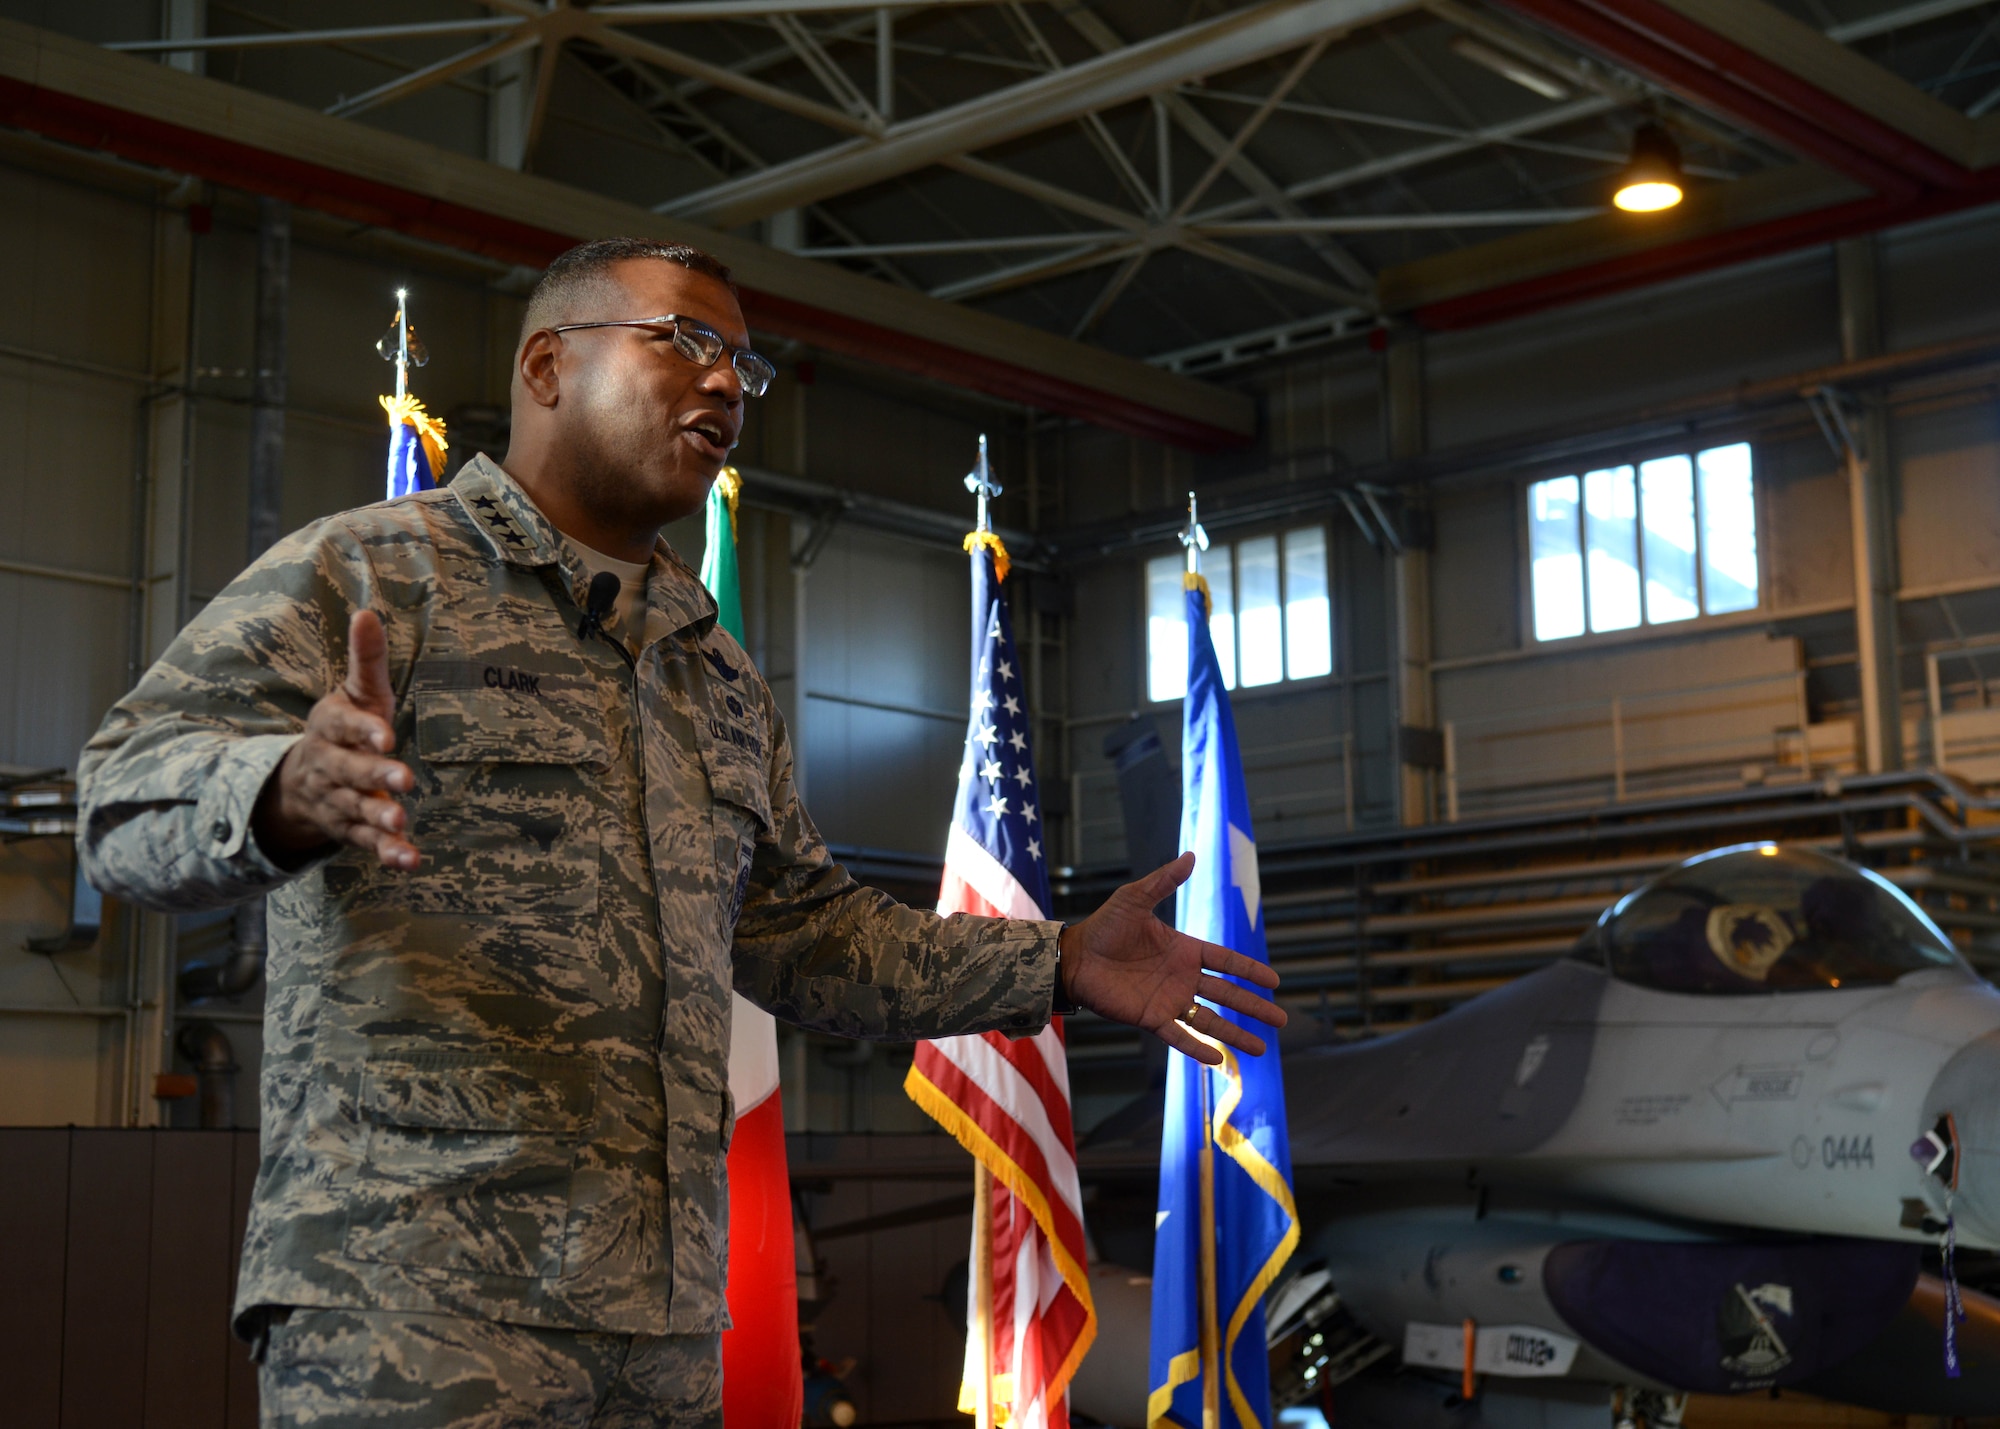 Lt. Gen. Richard Clark speaks to Airmen during an all call at Aviano Air Base, Italy on Nov. 30, 2016. Clark highlighted his top priorities of executing the mission, inspiring Airmen and taking care of family. (U.S. Air Force photo by Senior Airman Austin Harvill)